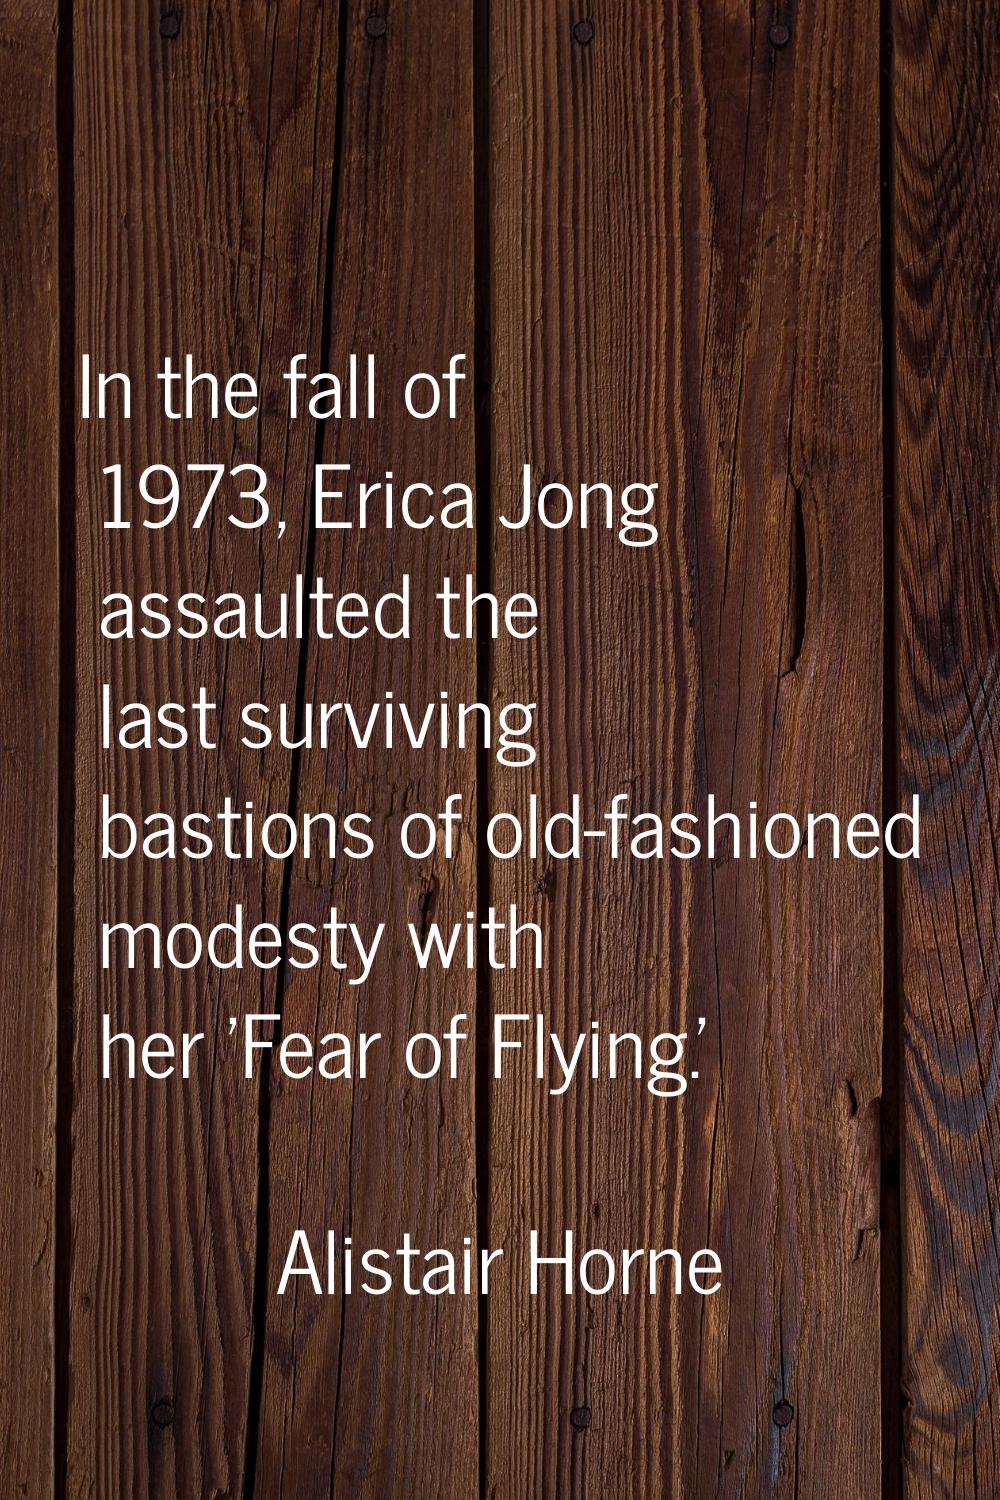 In the fall of 1973, Erica Jong assaulted the last surviving bastions of old-fashioned modesty with